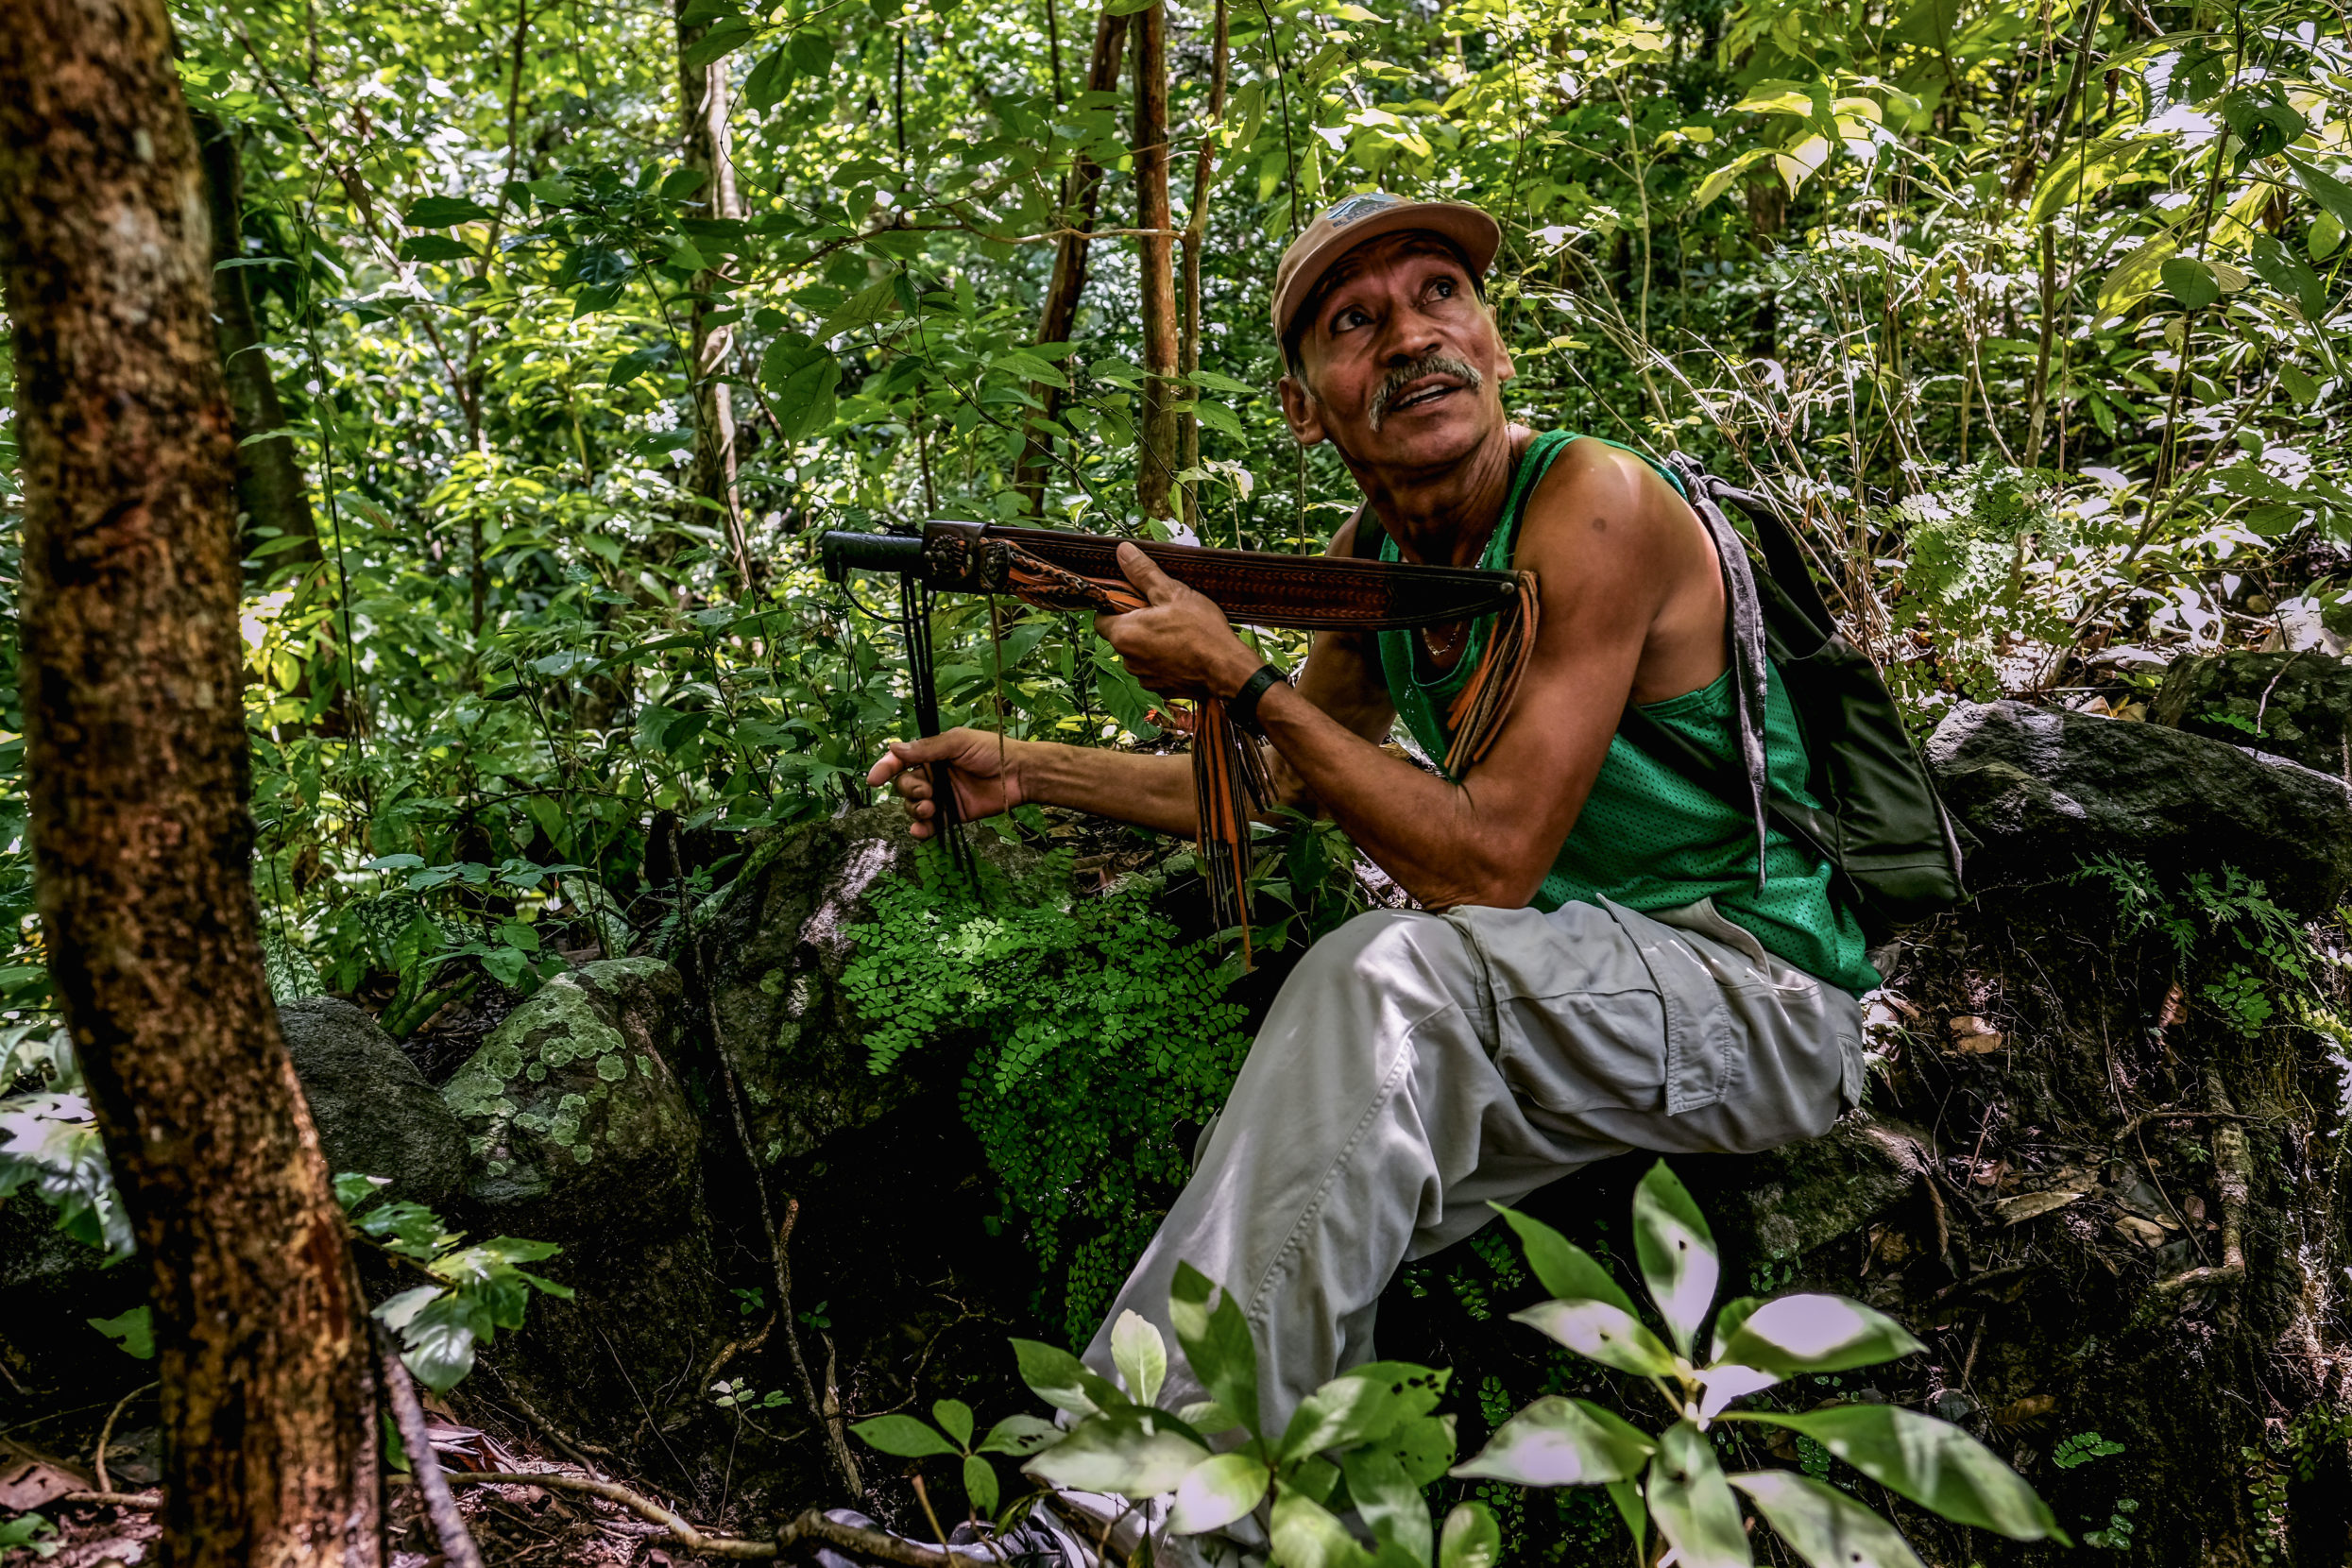 Guide Rafael Hernández recounts how Cinquera Forest Ecological Park was a refuge for guerrilla fighters during the Salvadoran Civil War. Photo: Stacey Leasca.